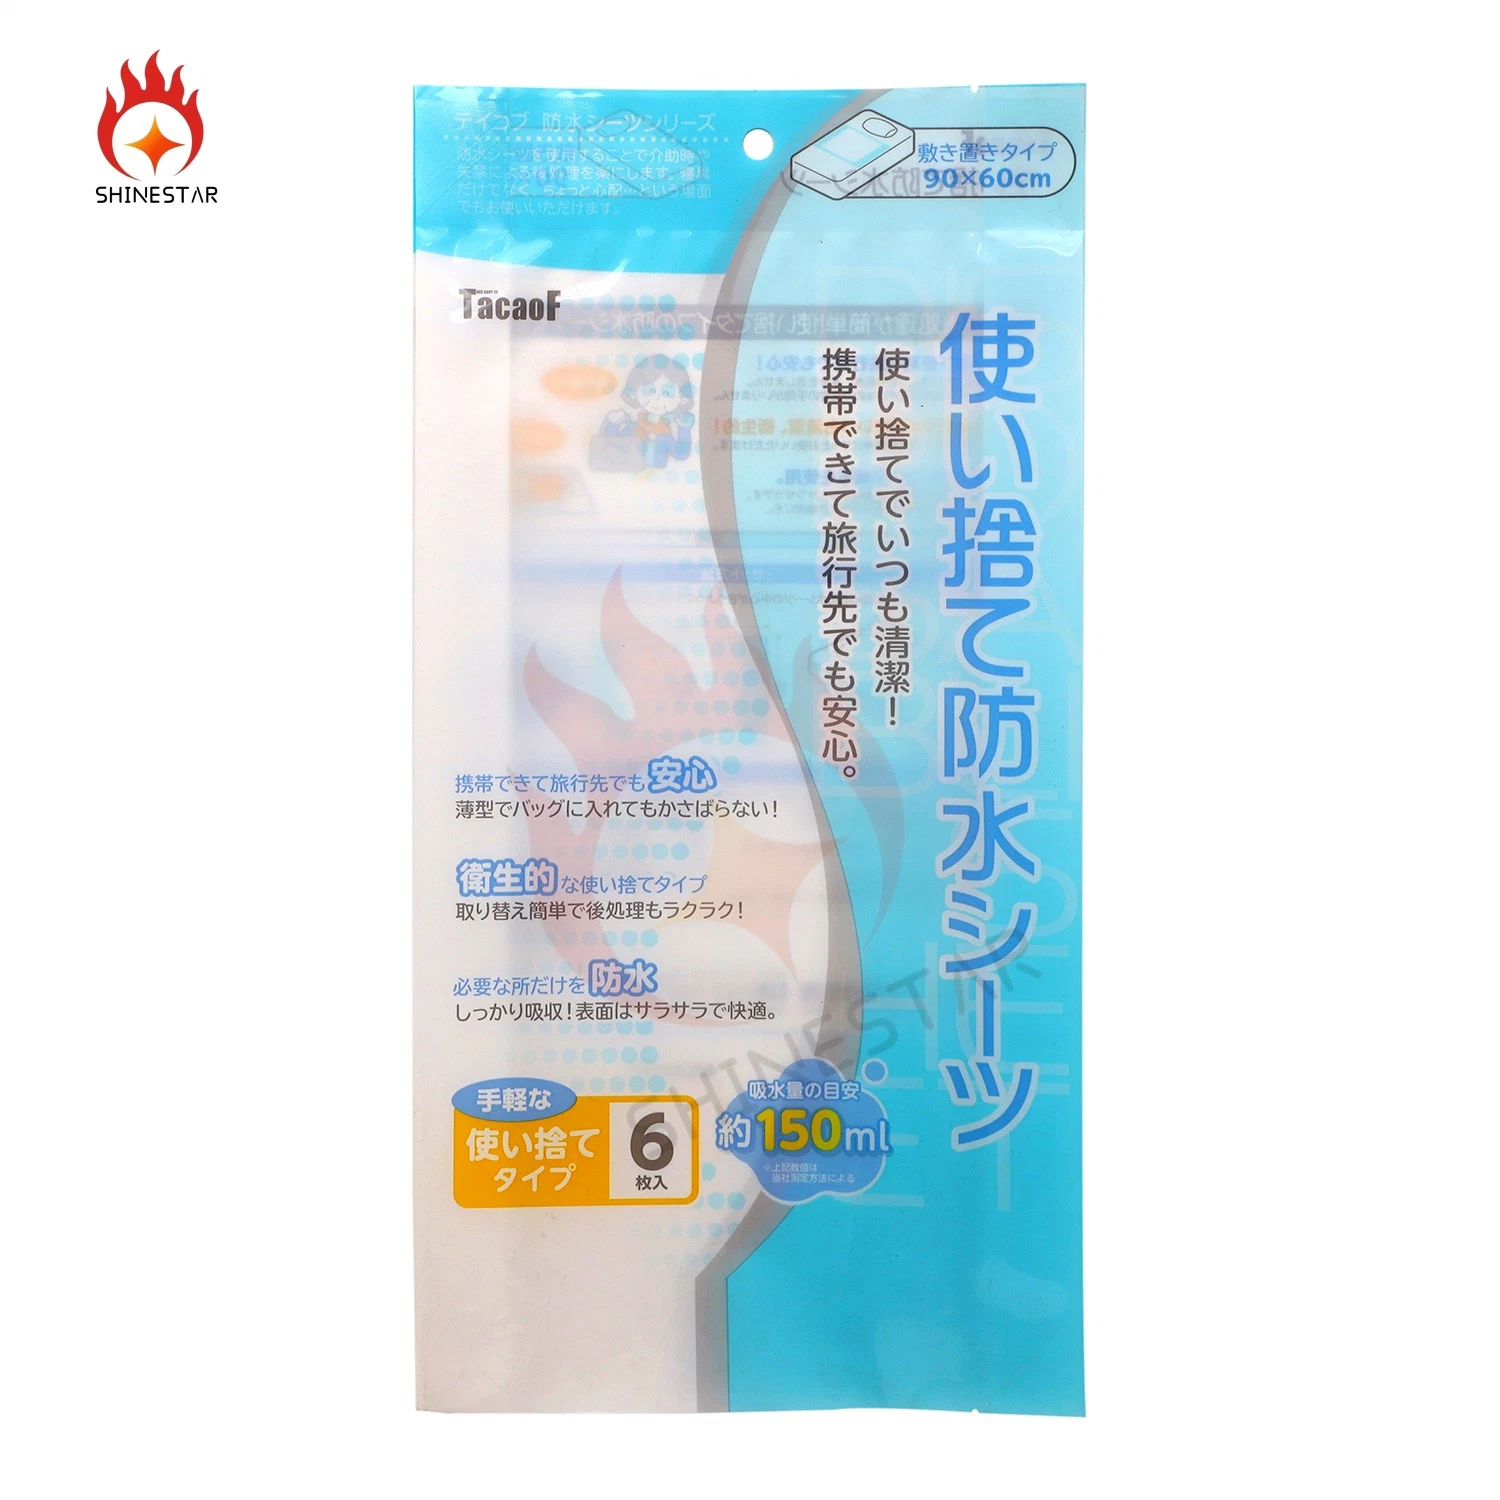 Lightweight Soft Material Color Printing Heat Sealed Plastic with Tear Waterproof Pad Packaging Bag